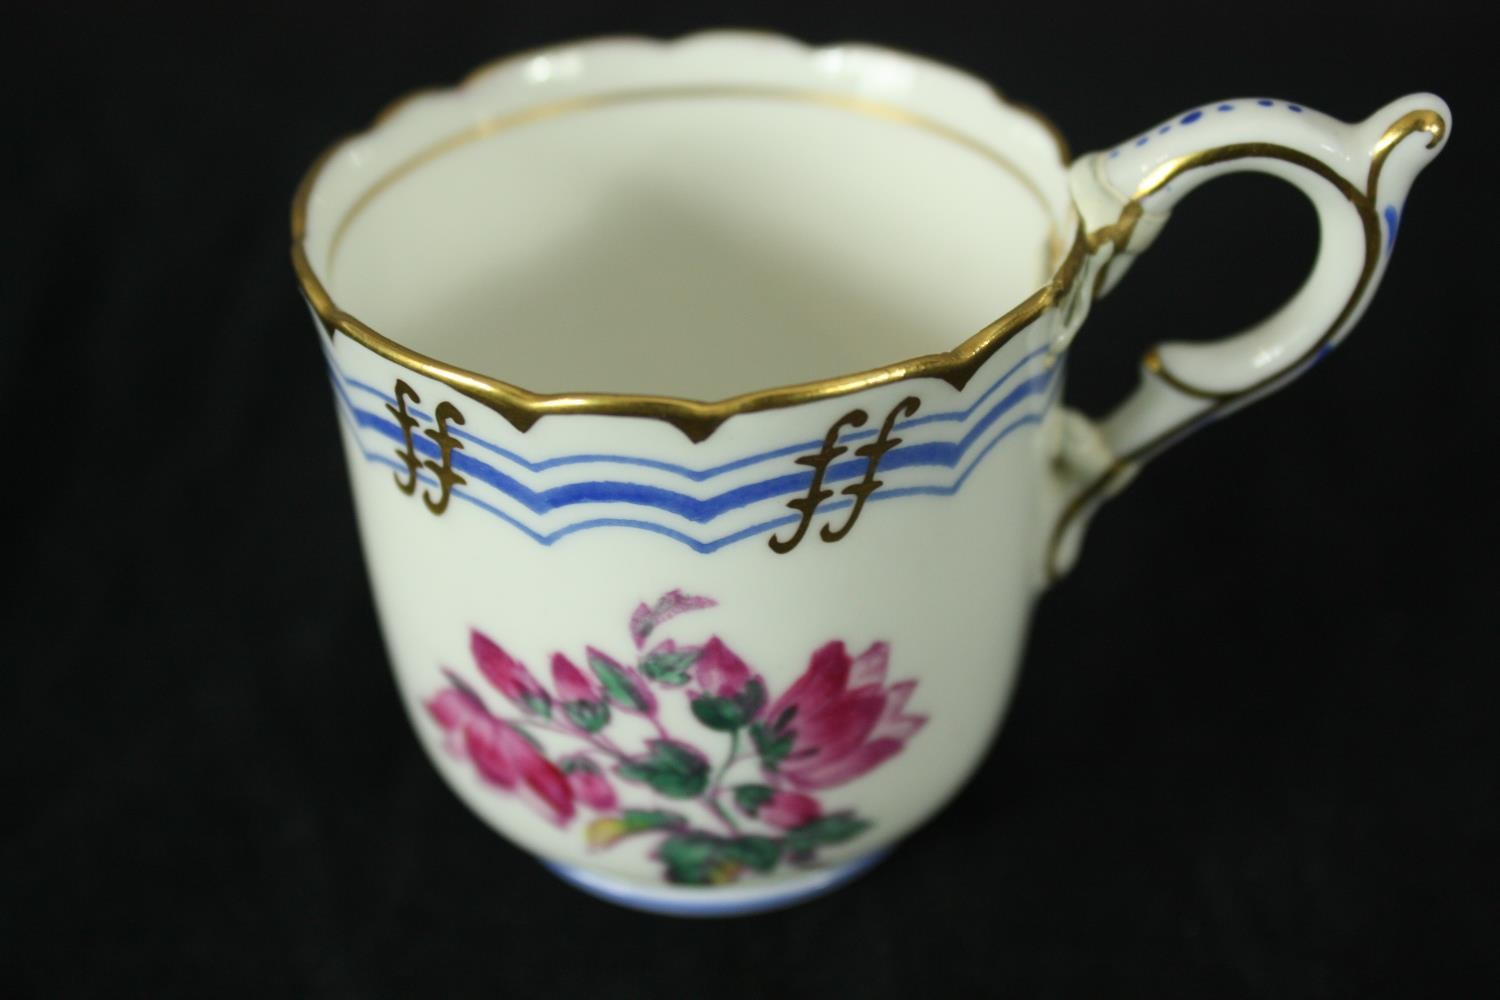 A set of six early 19th century Coalport tea cups and saucers, hand decorated in gilt and with - Image 5 of 7